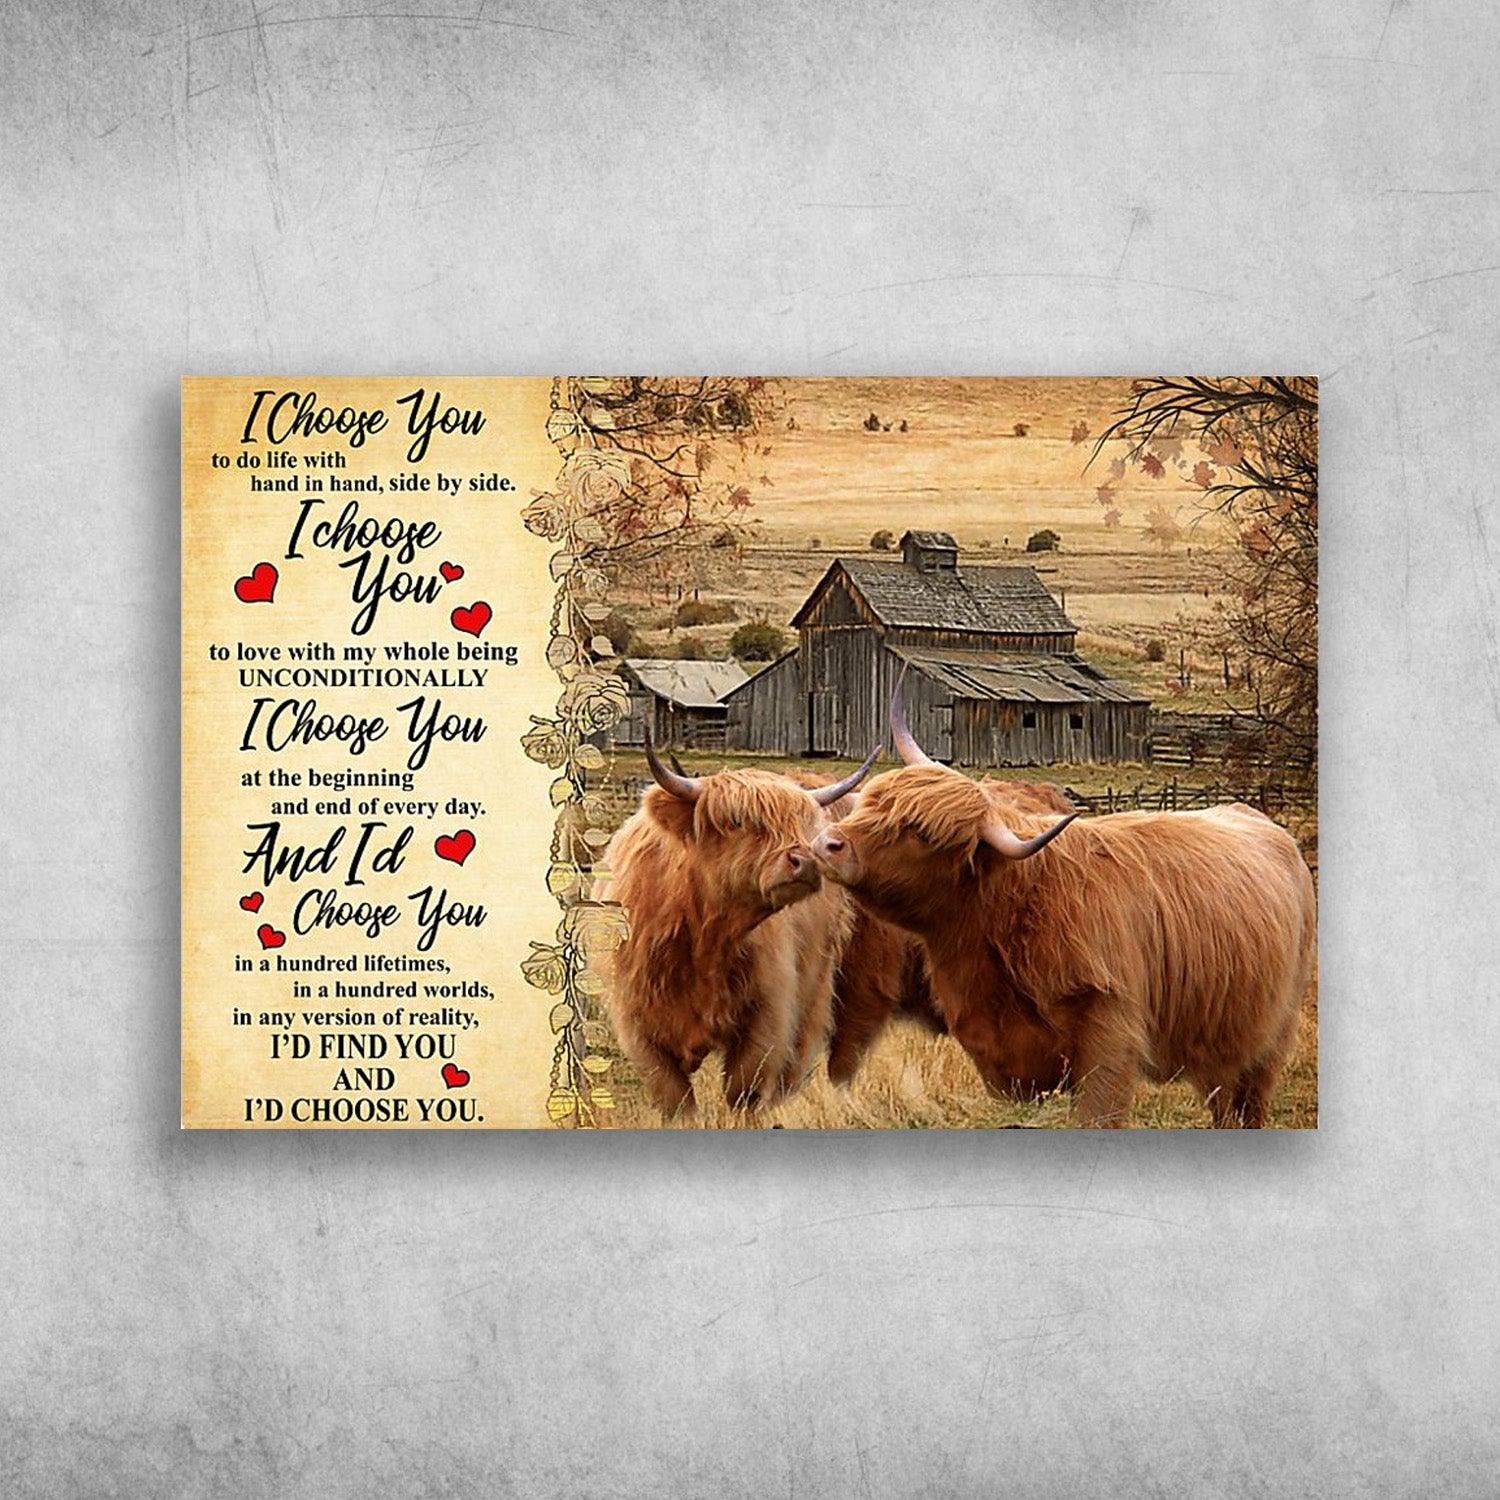 Highland Cattle Landscape Canvas, I Choose You To Do Life With Hand In Hand Side By Side Premium Wrapped Canvas- Perfect Gift For Farmer, Cattle Lover - Amzanimalsgift